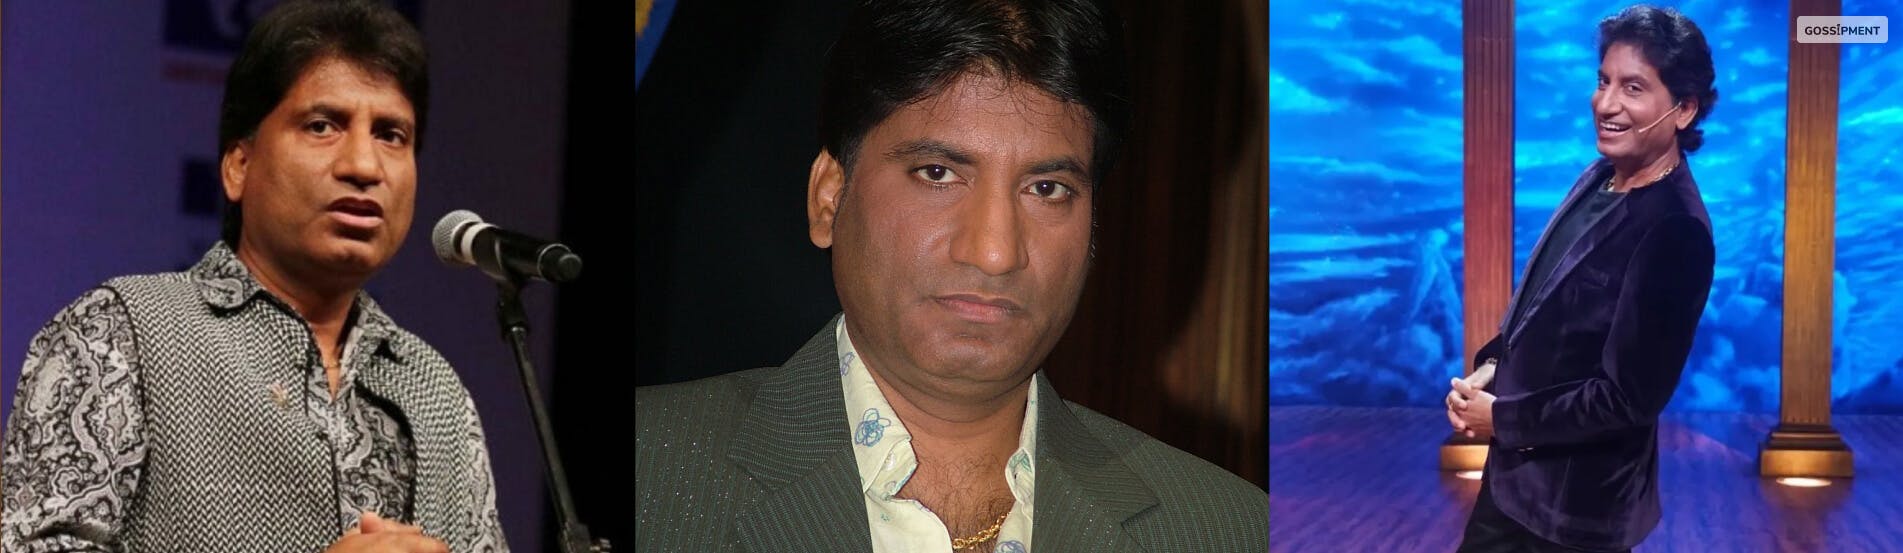 Cover Image for Comedian Raju Srivastav Suffers Heart Attack, Admitted To Hospital, Says Reports